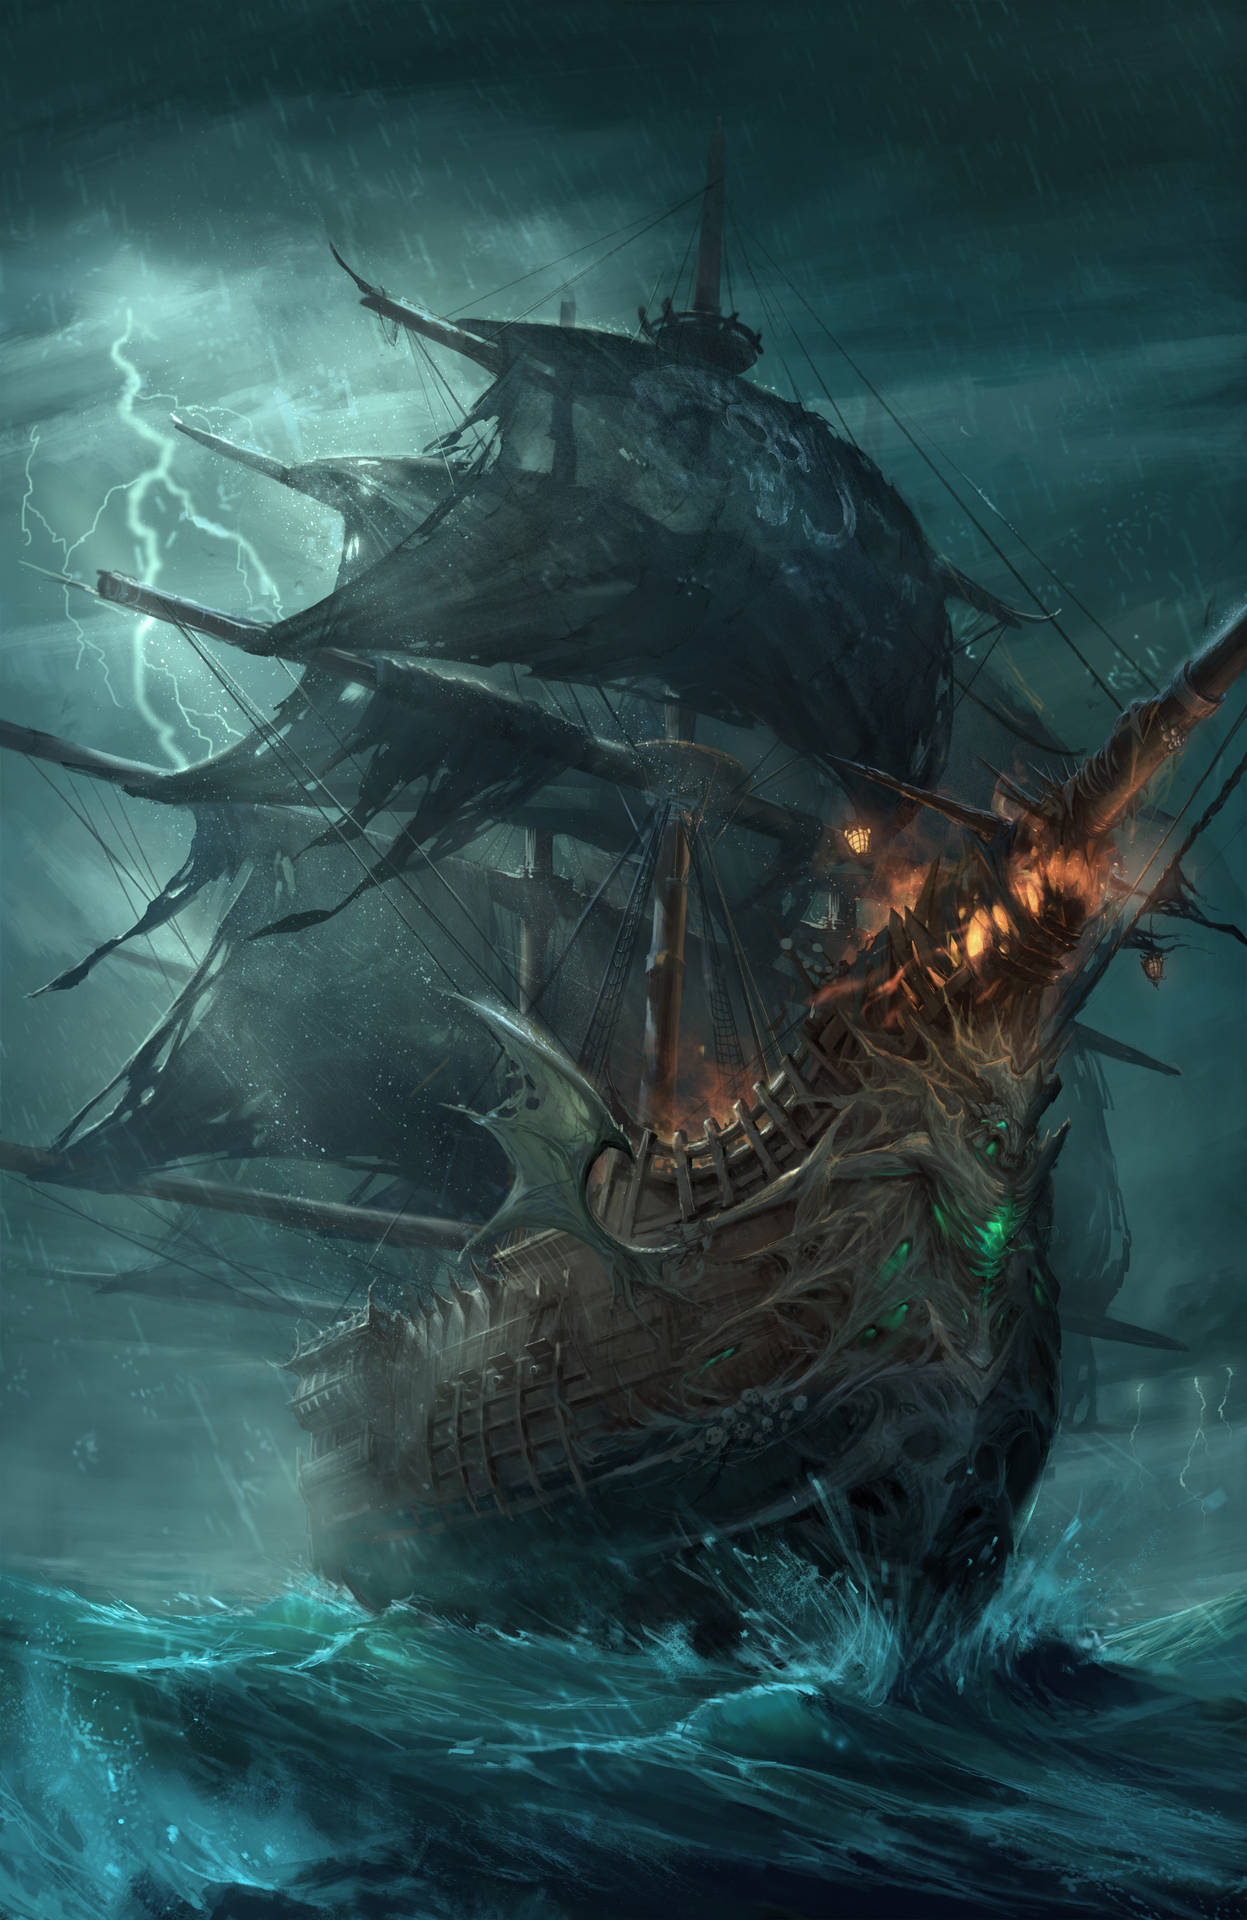 Cool Pirate Ghost Ship